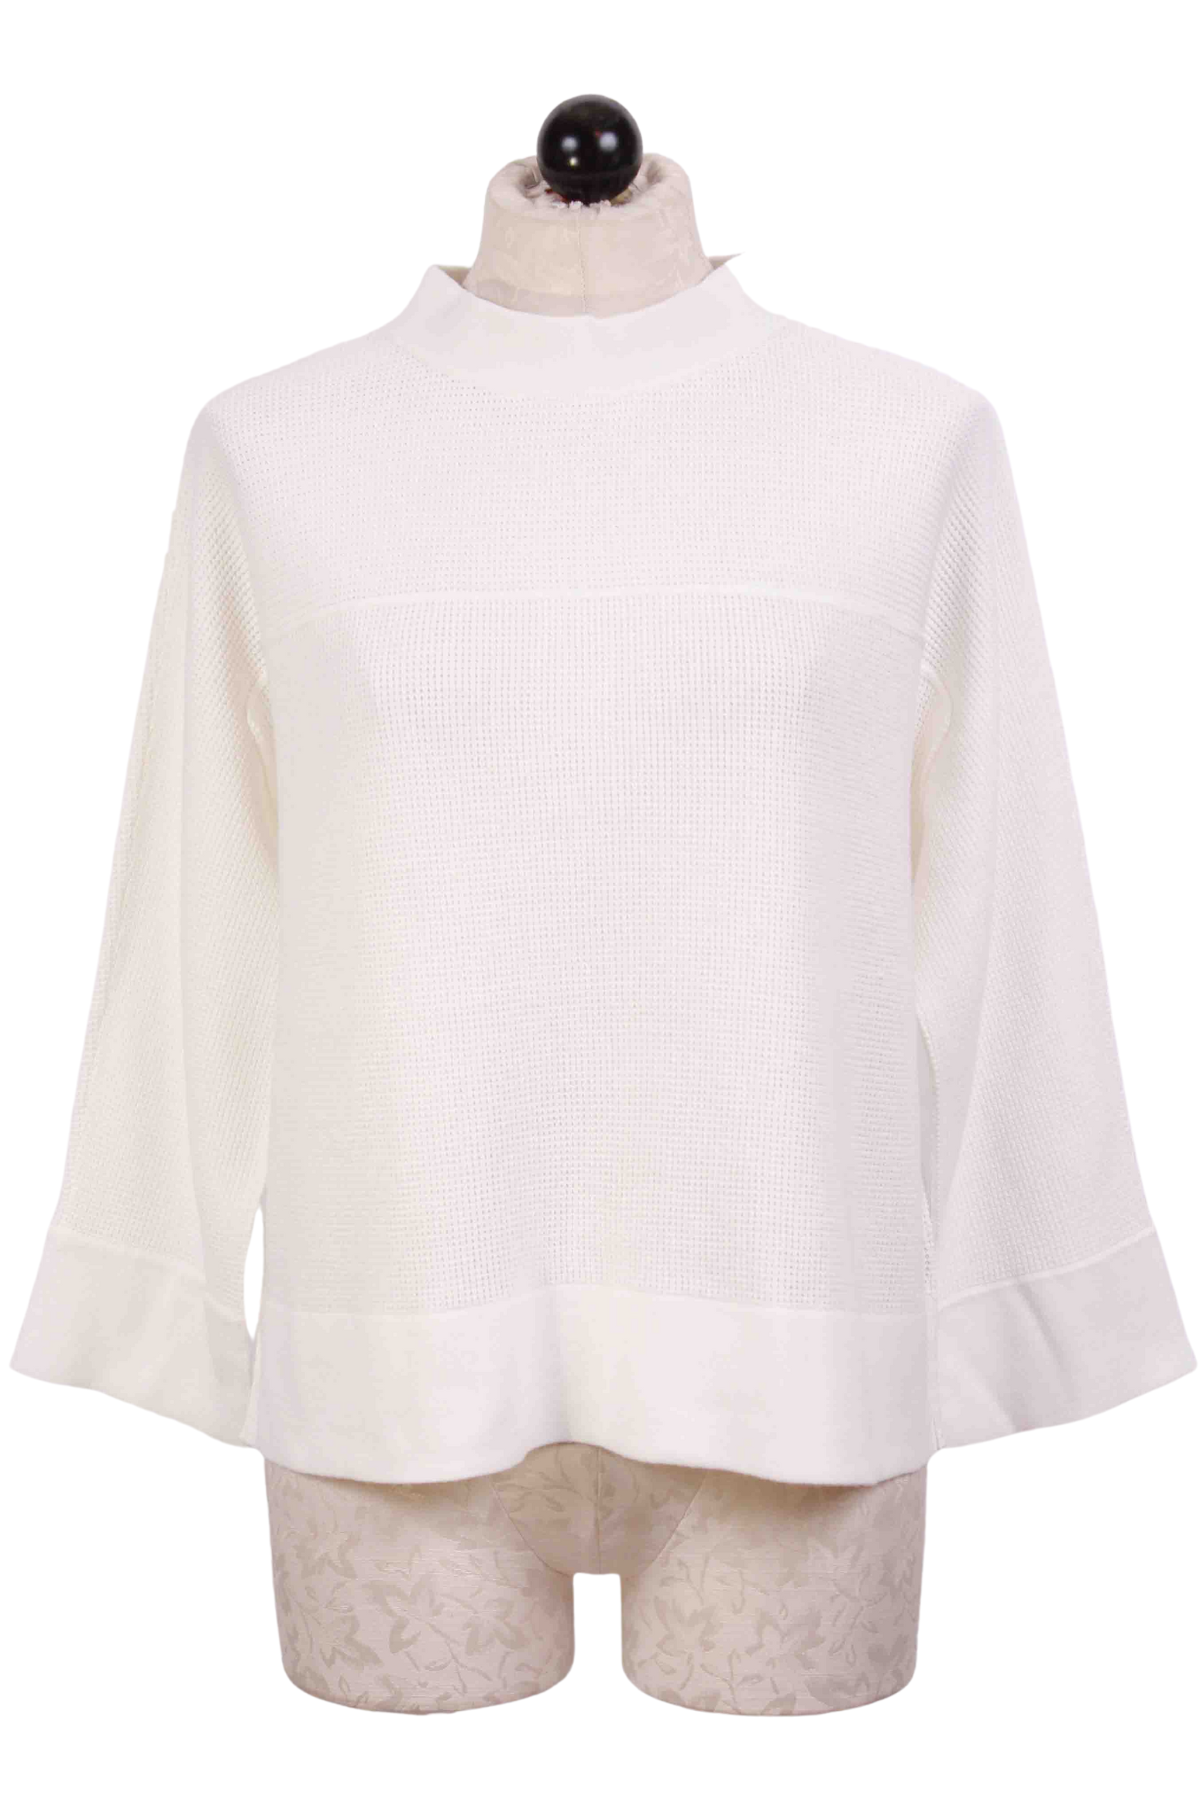 Winter White Thermal Knit Dolman Sleeve Funnel Neck Top by Liv by Habitat